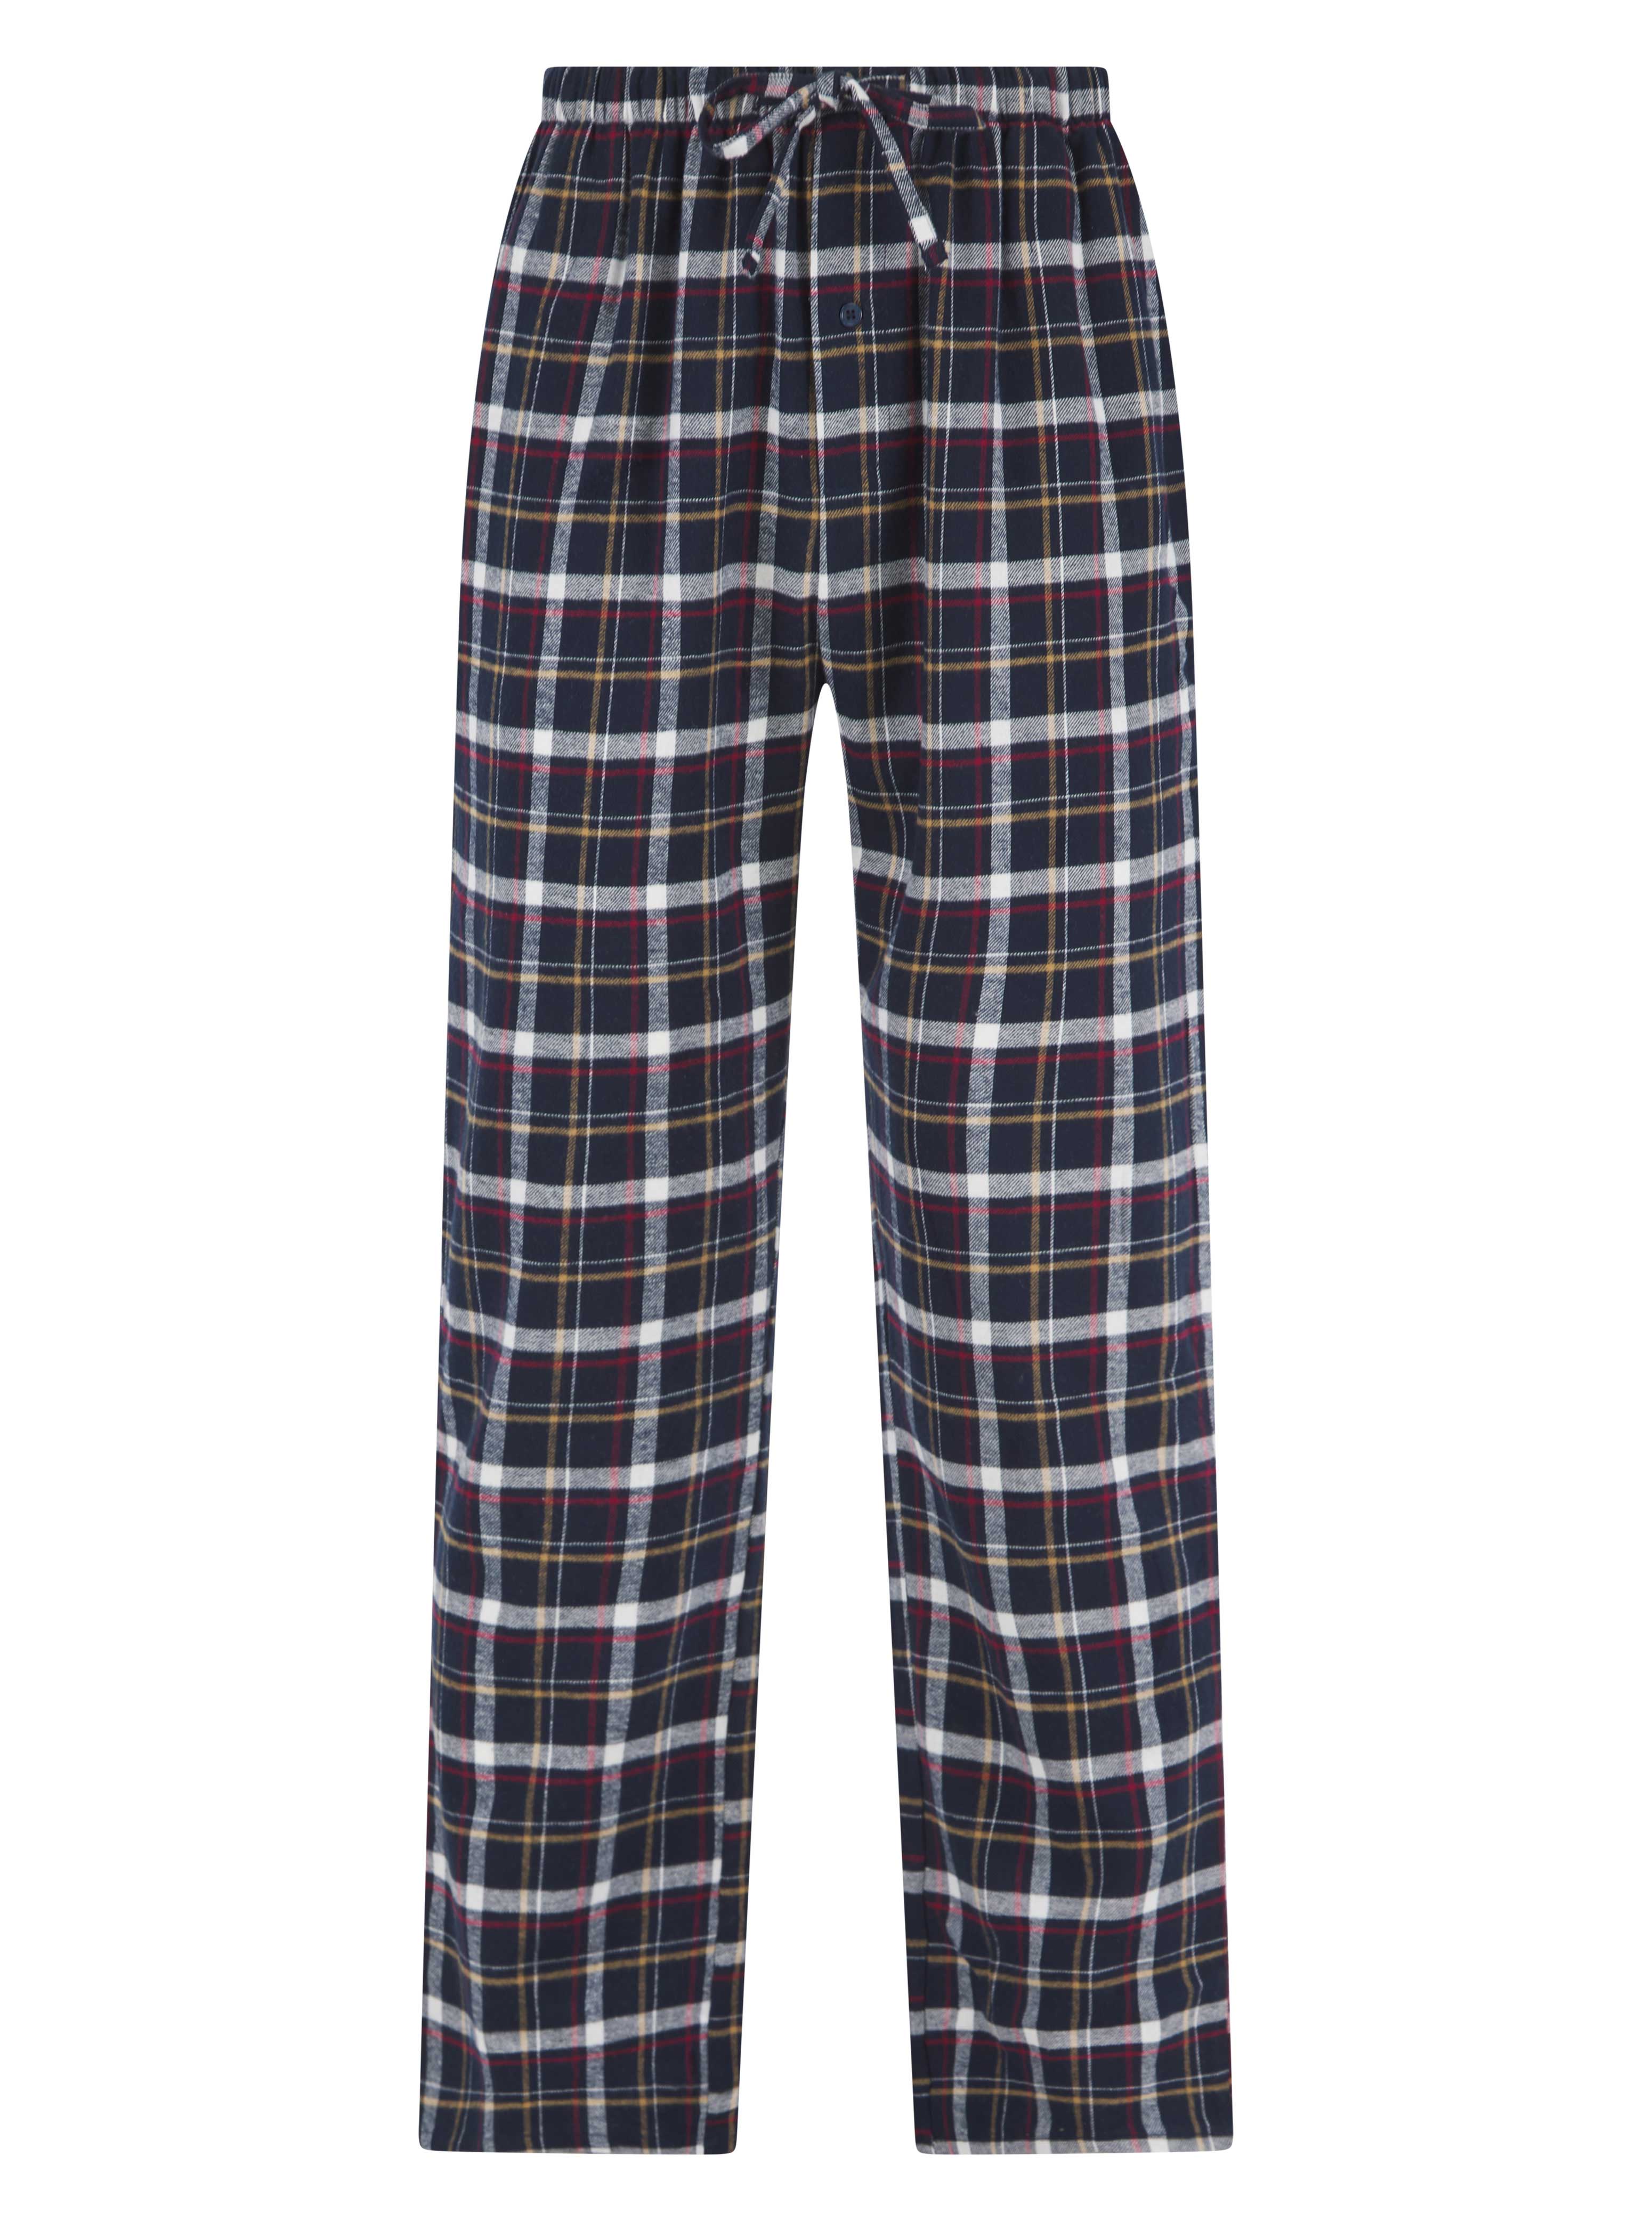 Woven Cotton Brushed Check Pyjama Trouser WR04807